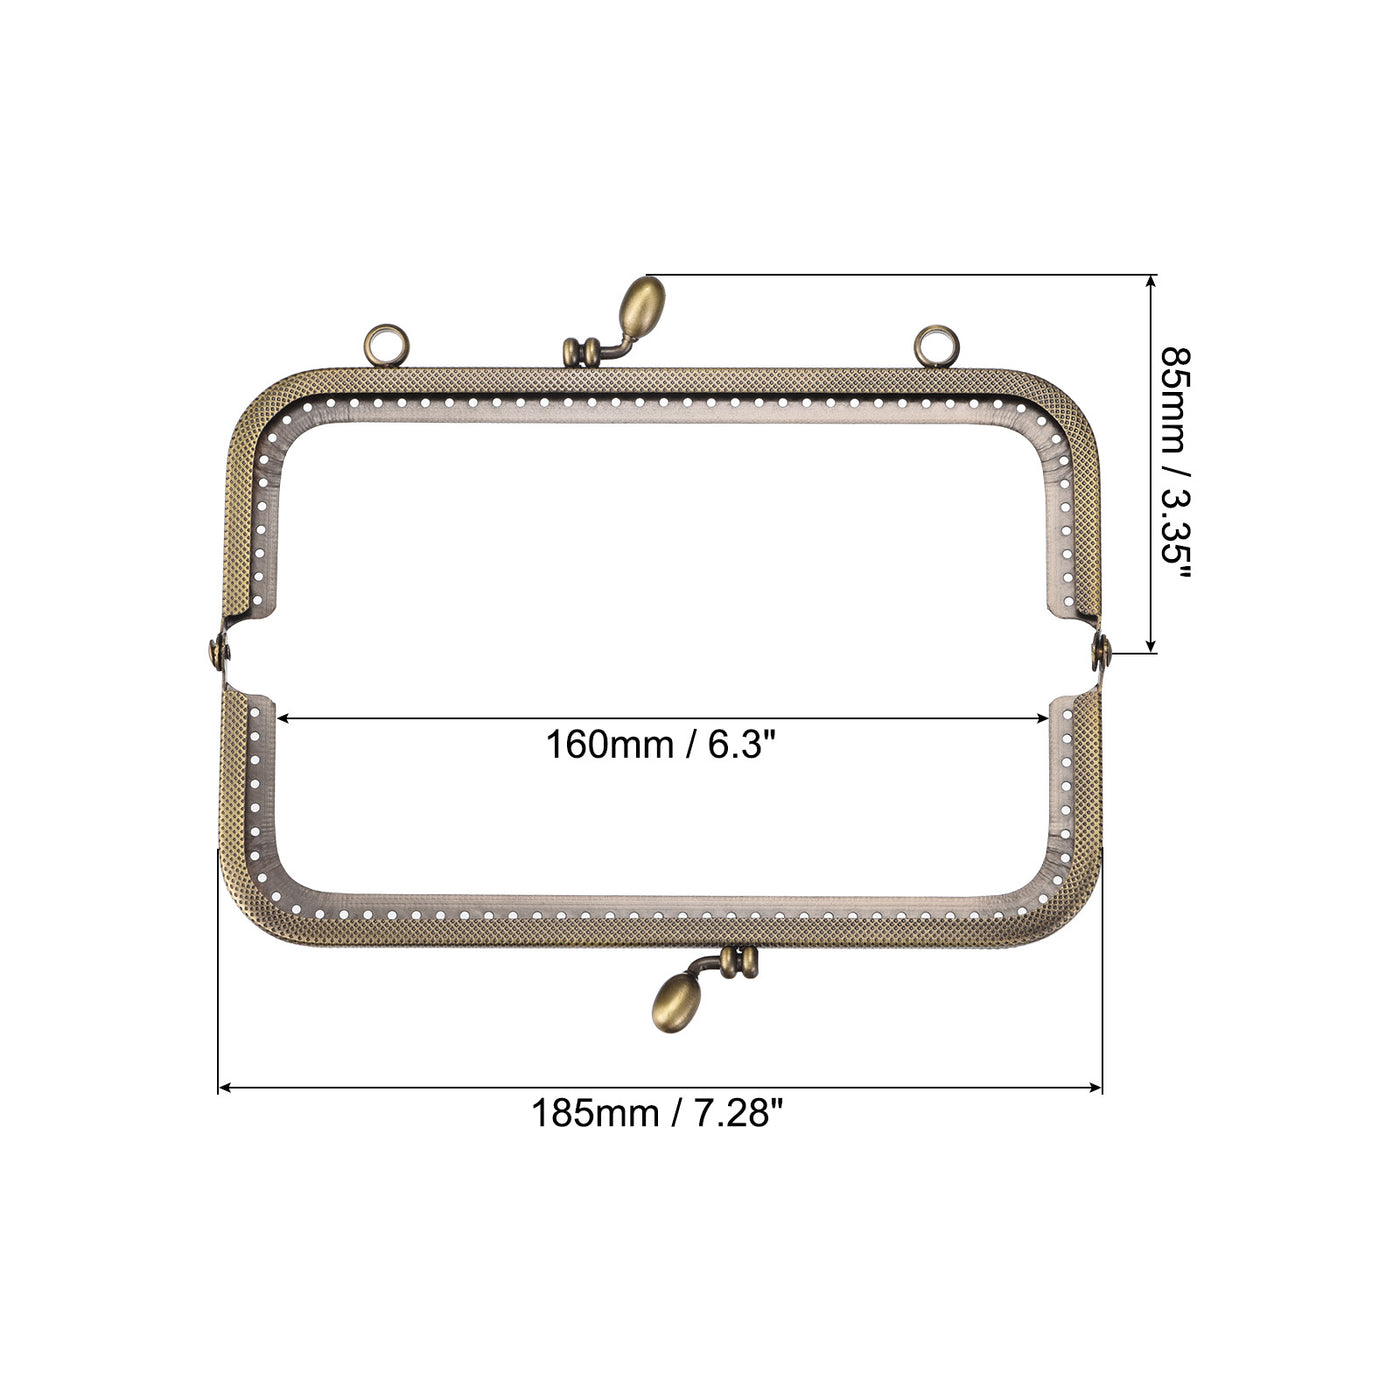 uxcell Uxcell Metal Purse Frames, 7.28" 3Pcs Kiss Lock Clasp Frame for Coin Bag DIY, Bronze